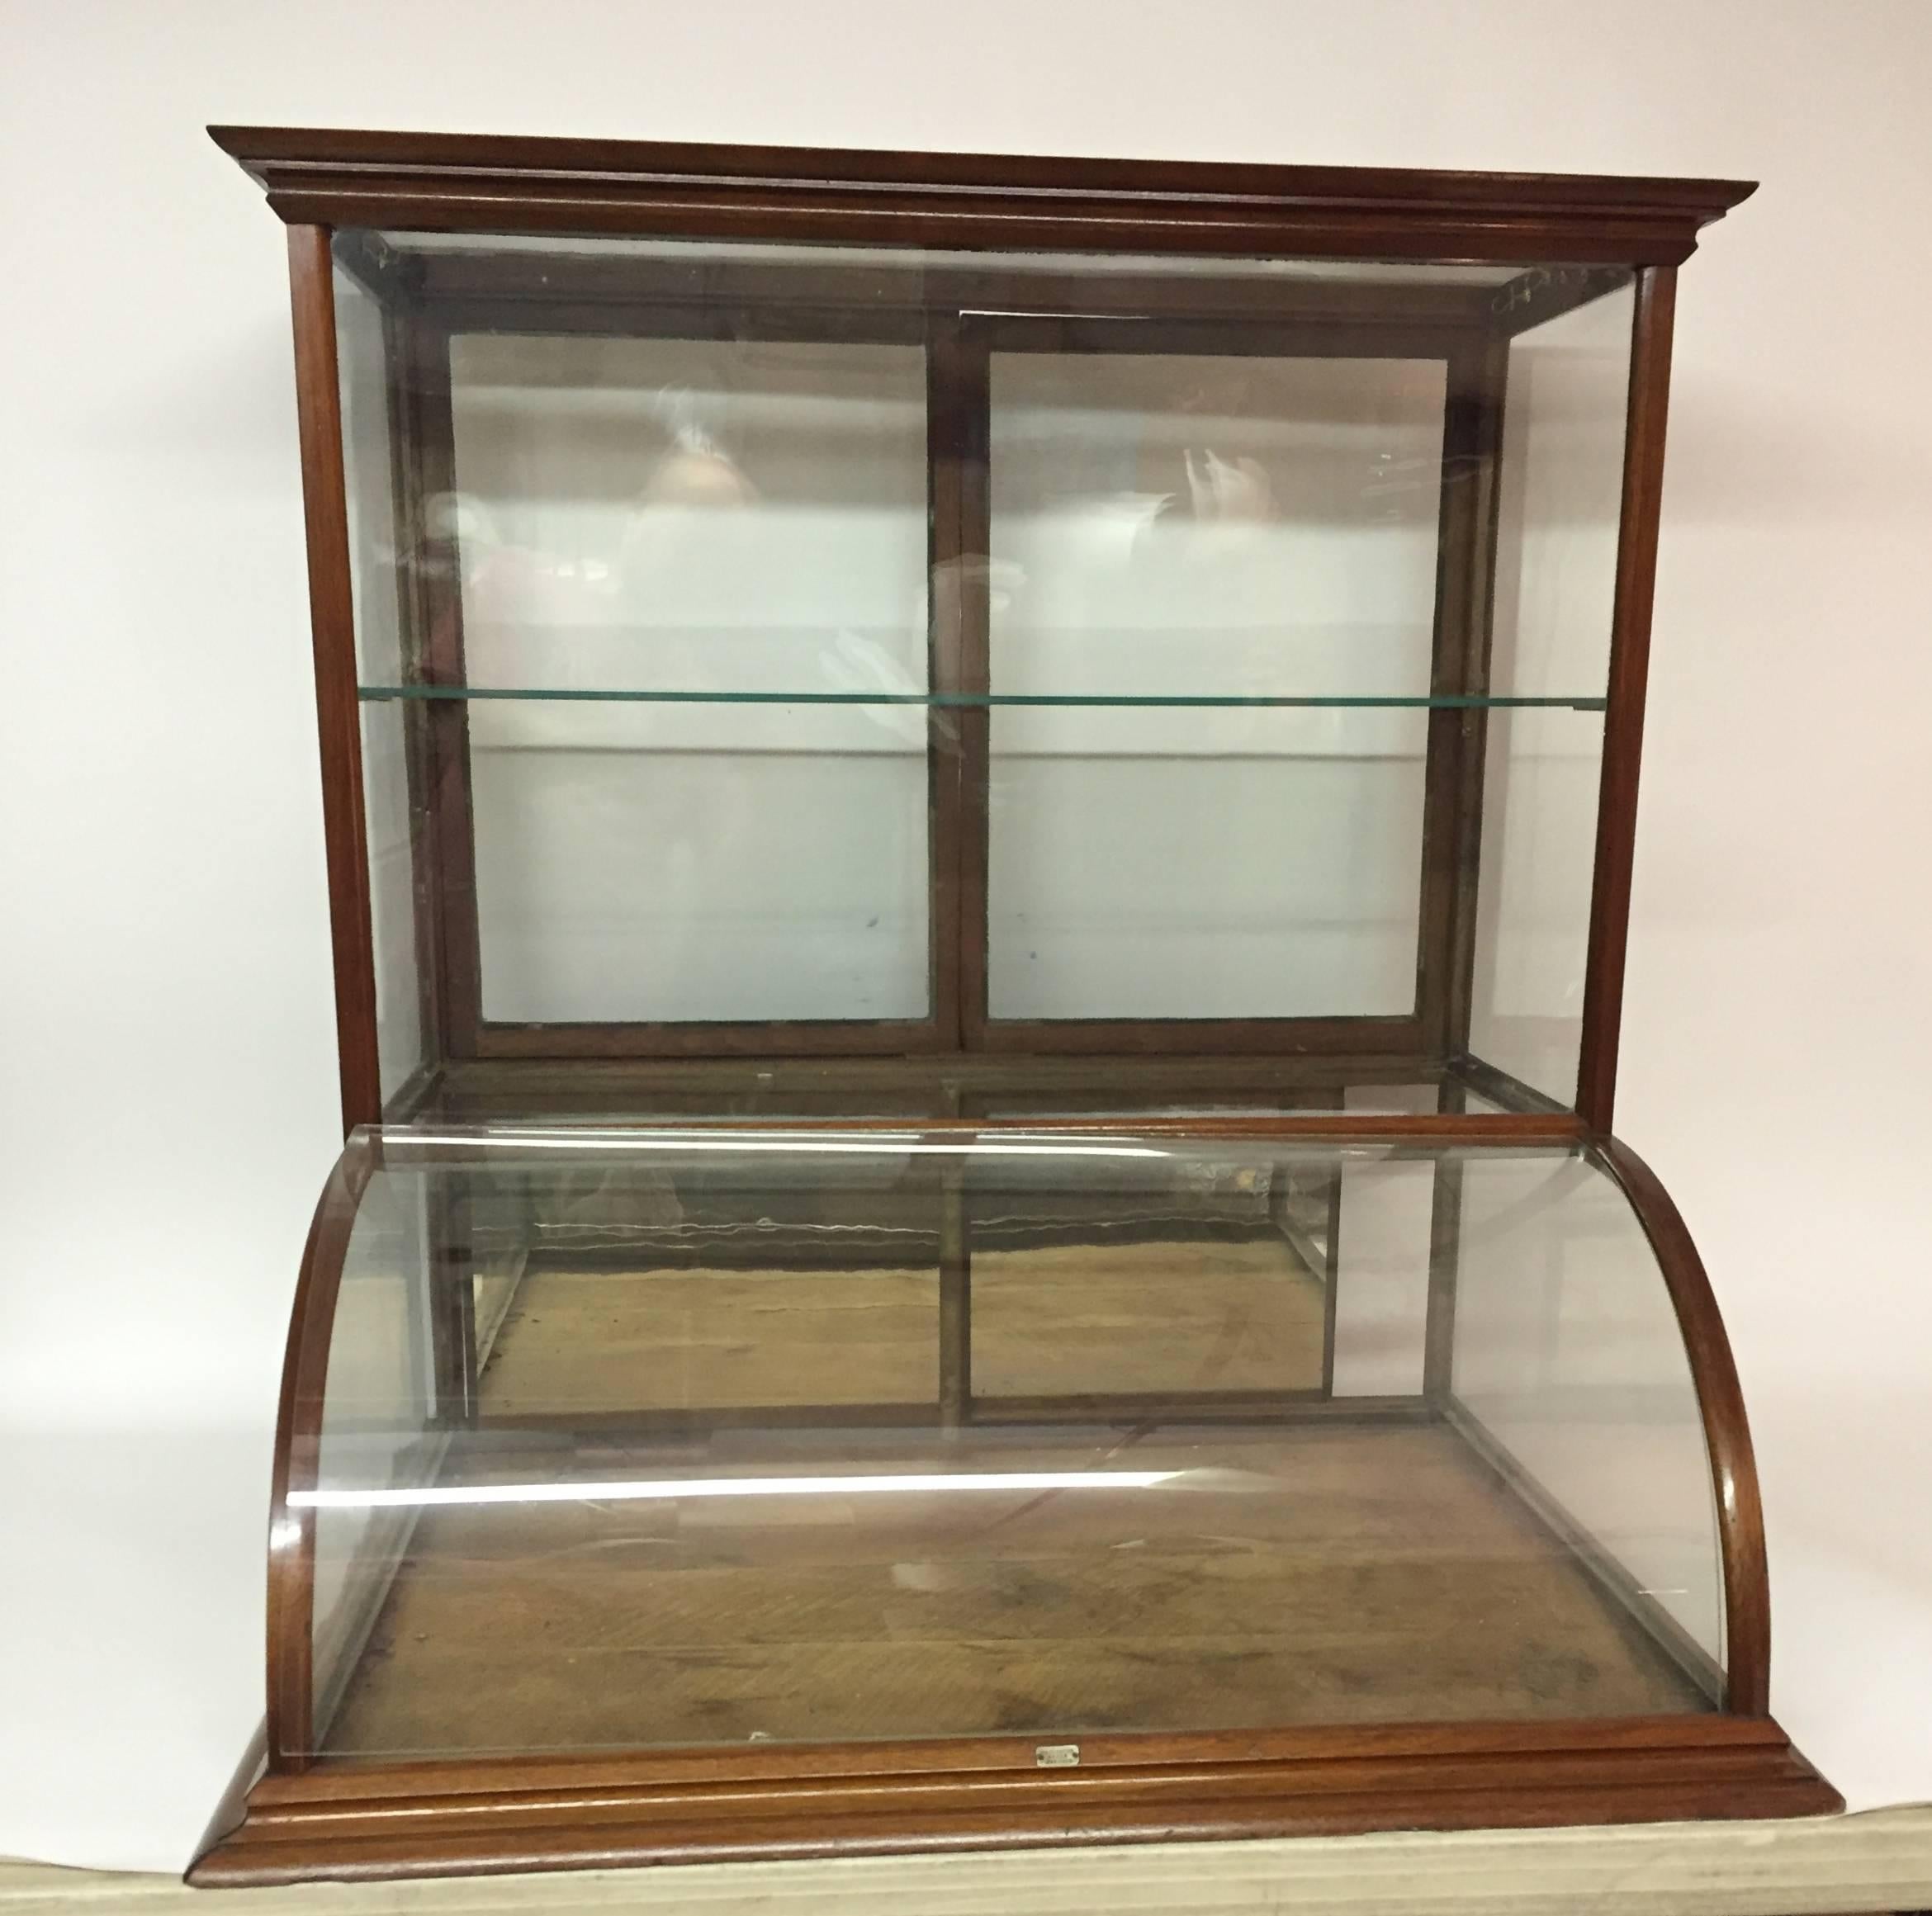 Monumental walnut curved and mirrored glass display cabinet. Tall counter top display typically found in a general retail or dry good store in the late 19th century-early 20th century. Mirrored glass sliding doors on bottom, curved glass front and